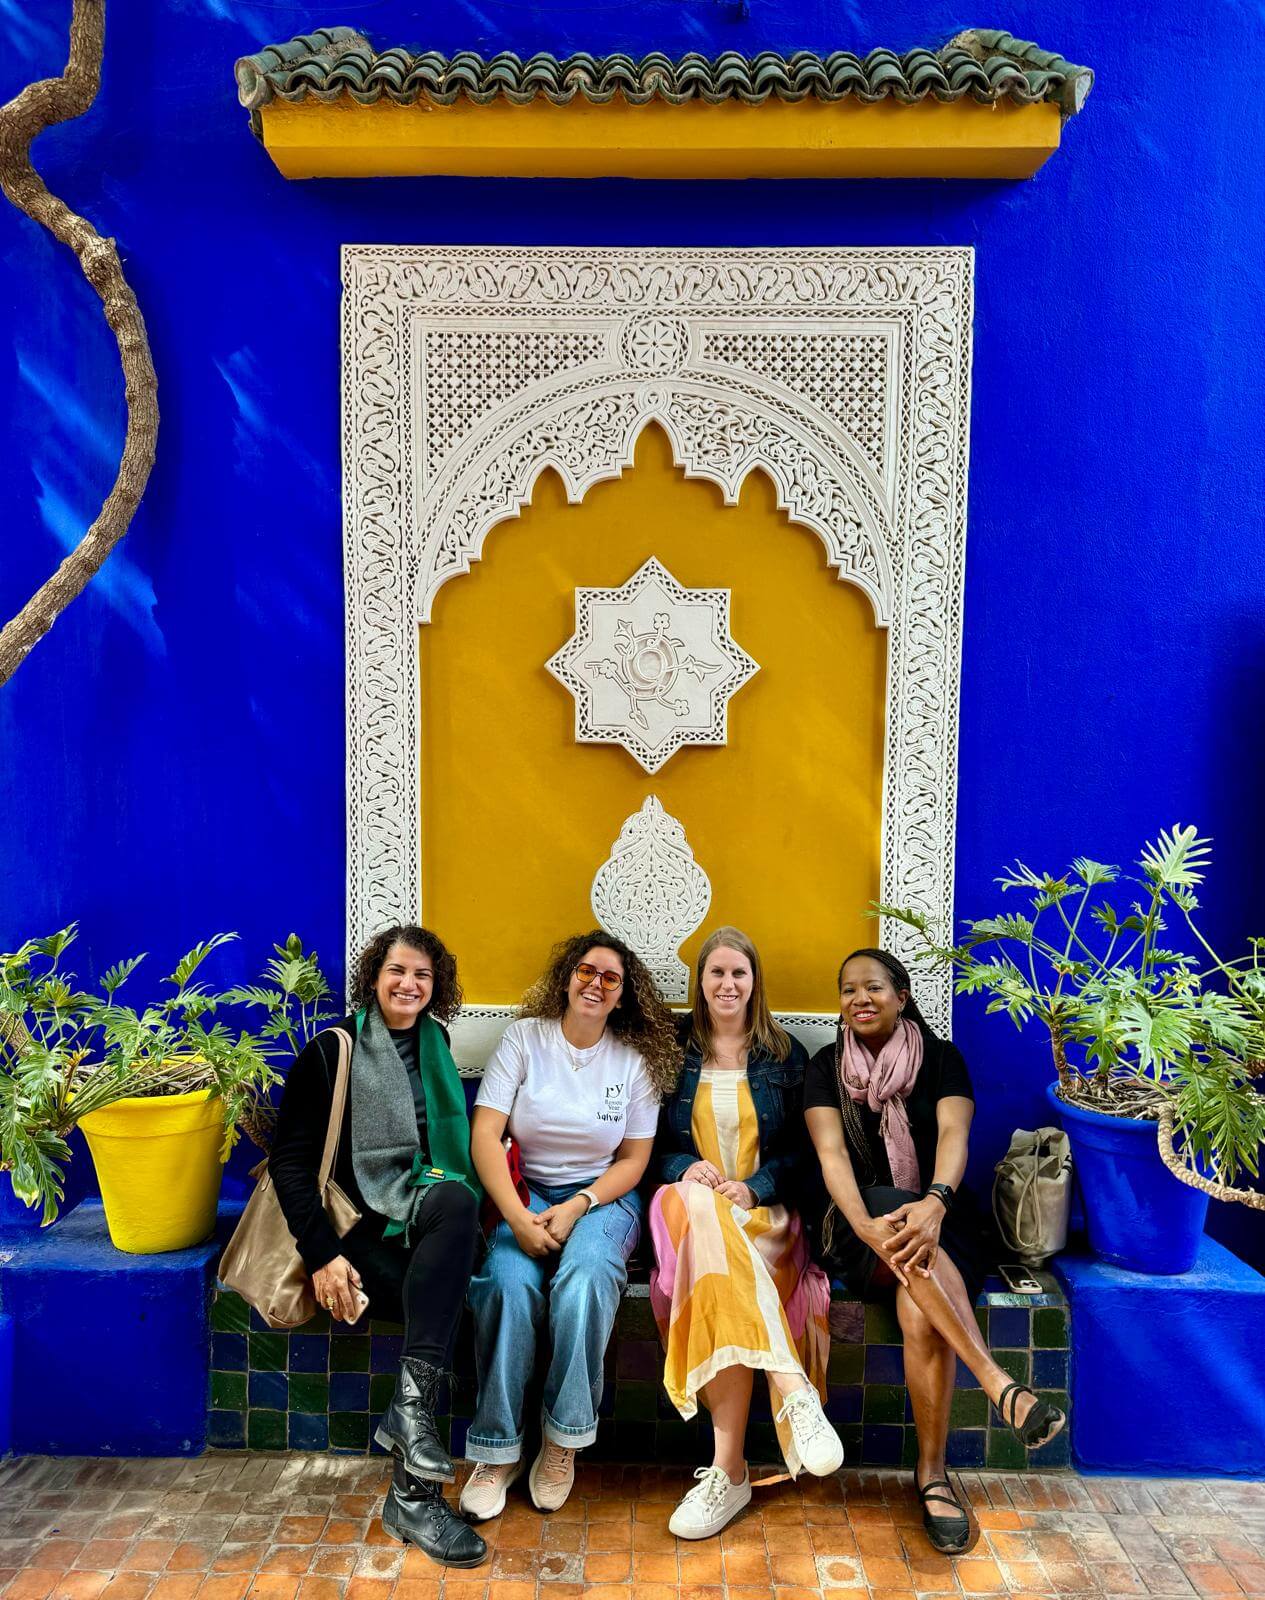 Tips for Women Visiting Morocco